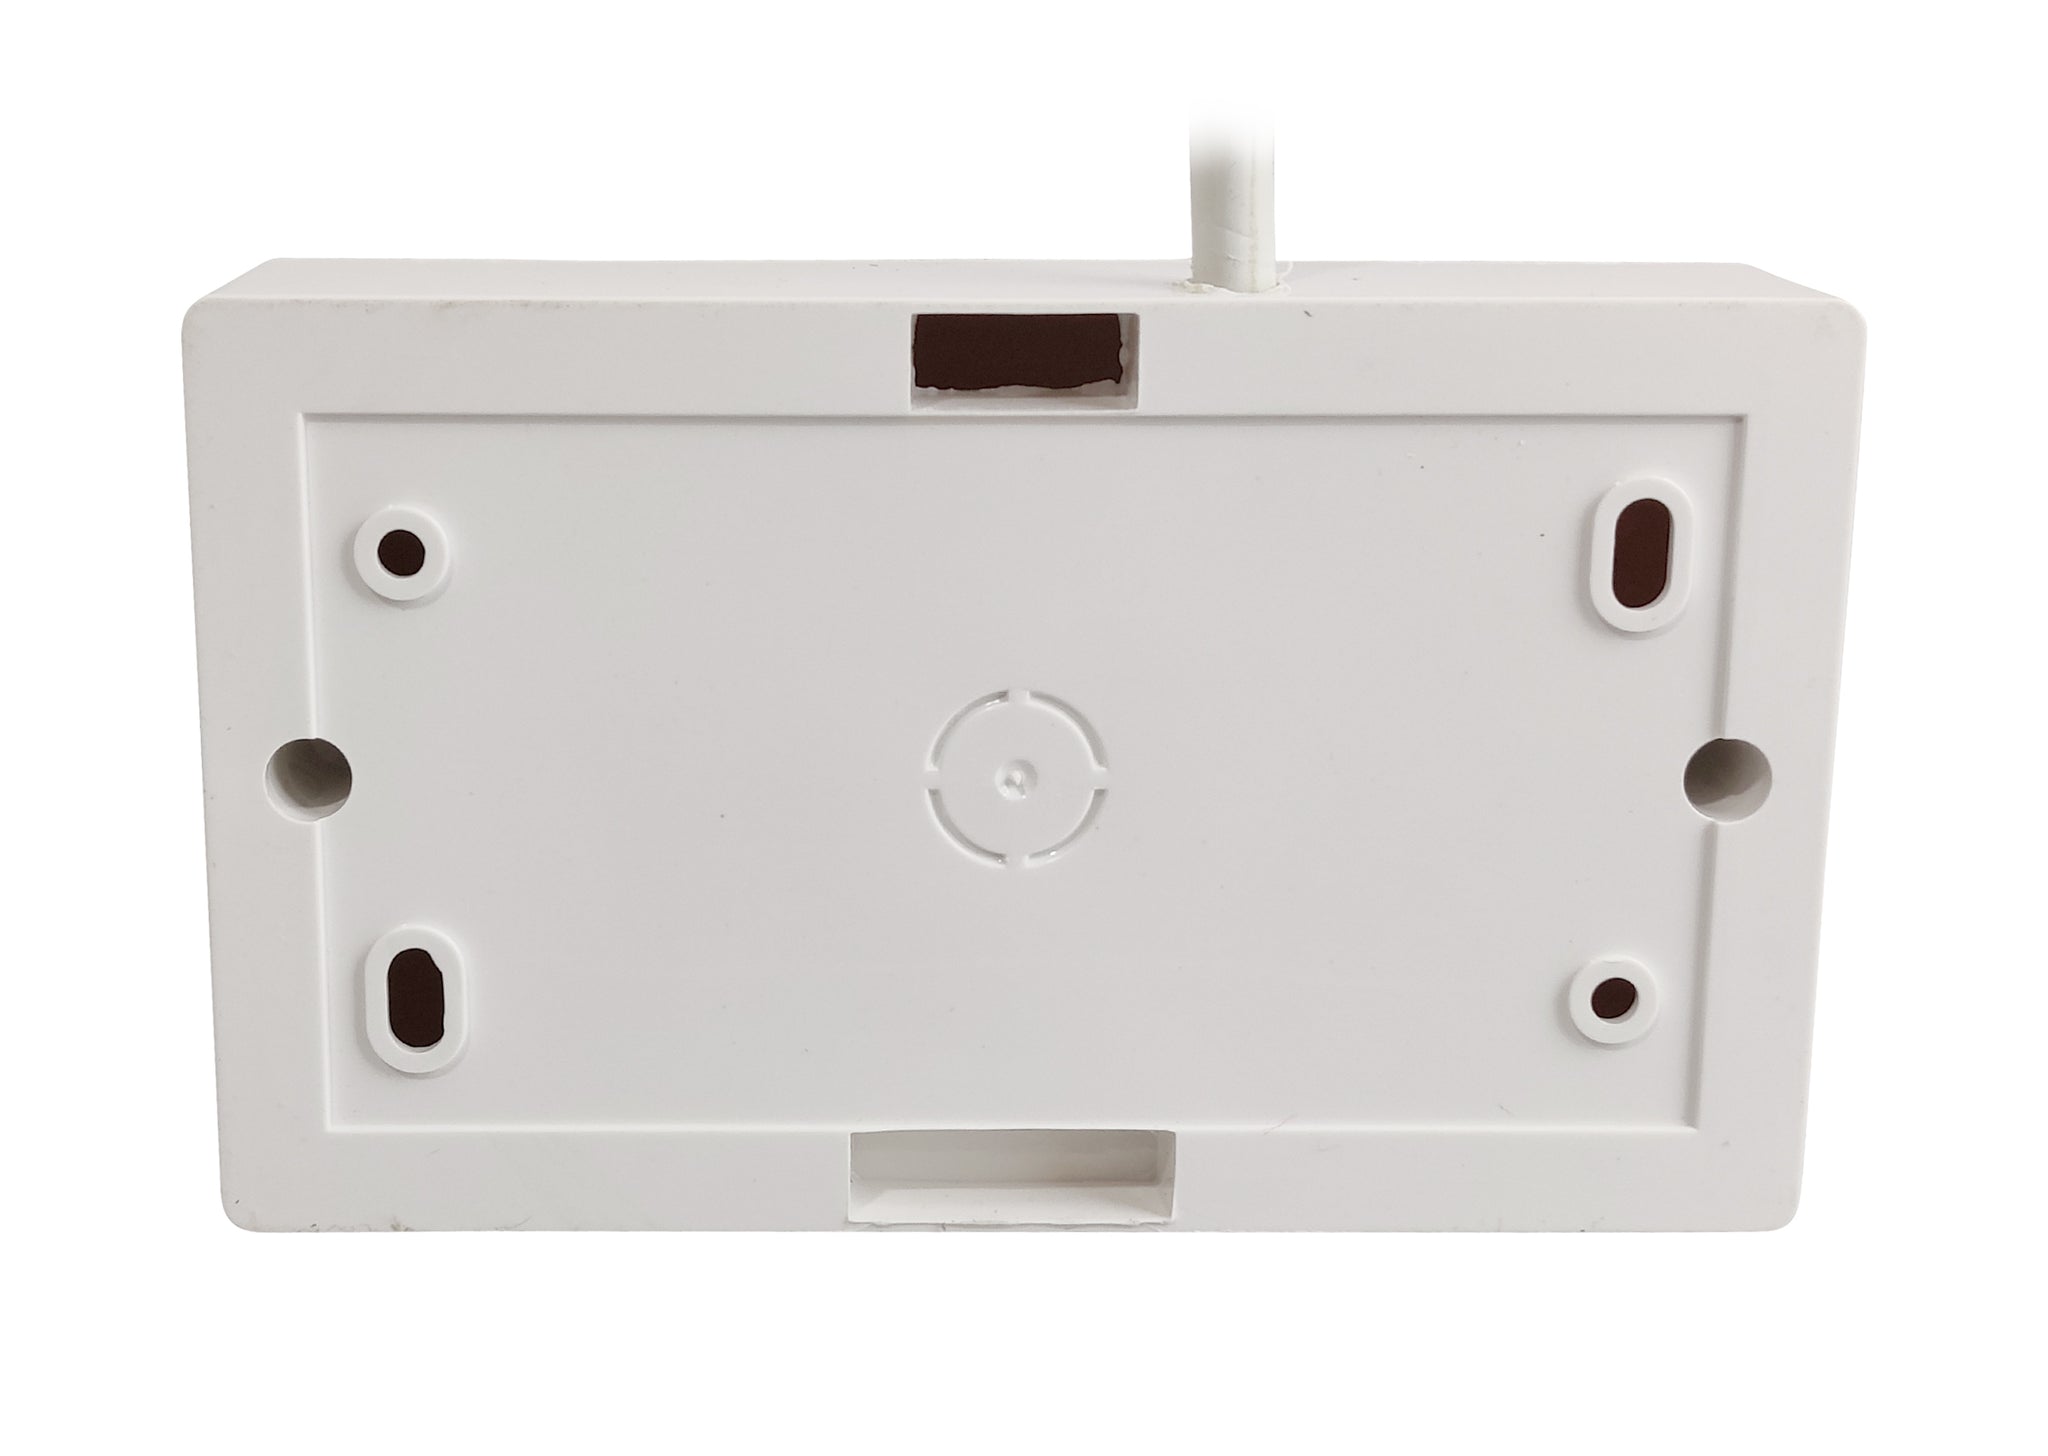 Palfrey Electric Extension Board - 1 Universal Socket + 1 Two Pin Socket + 1 USB Socket with 1.0 mm Heavy Duty Wire (White)